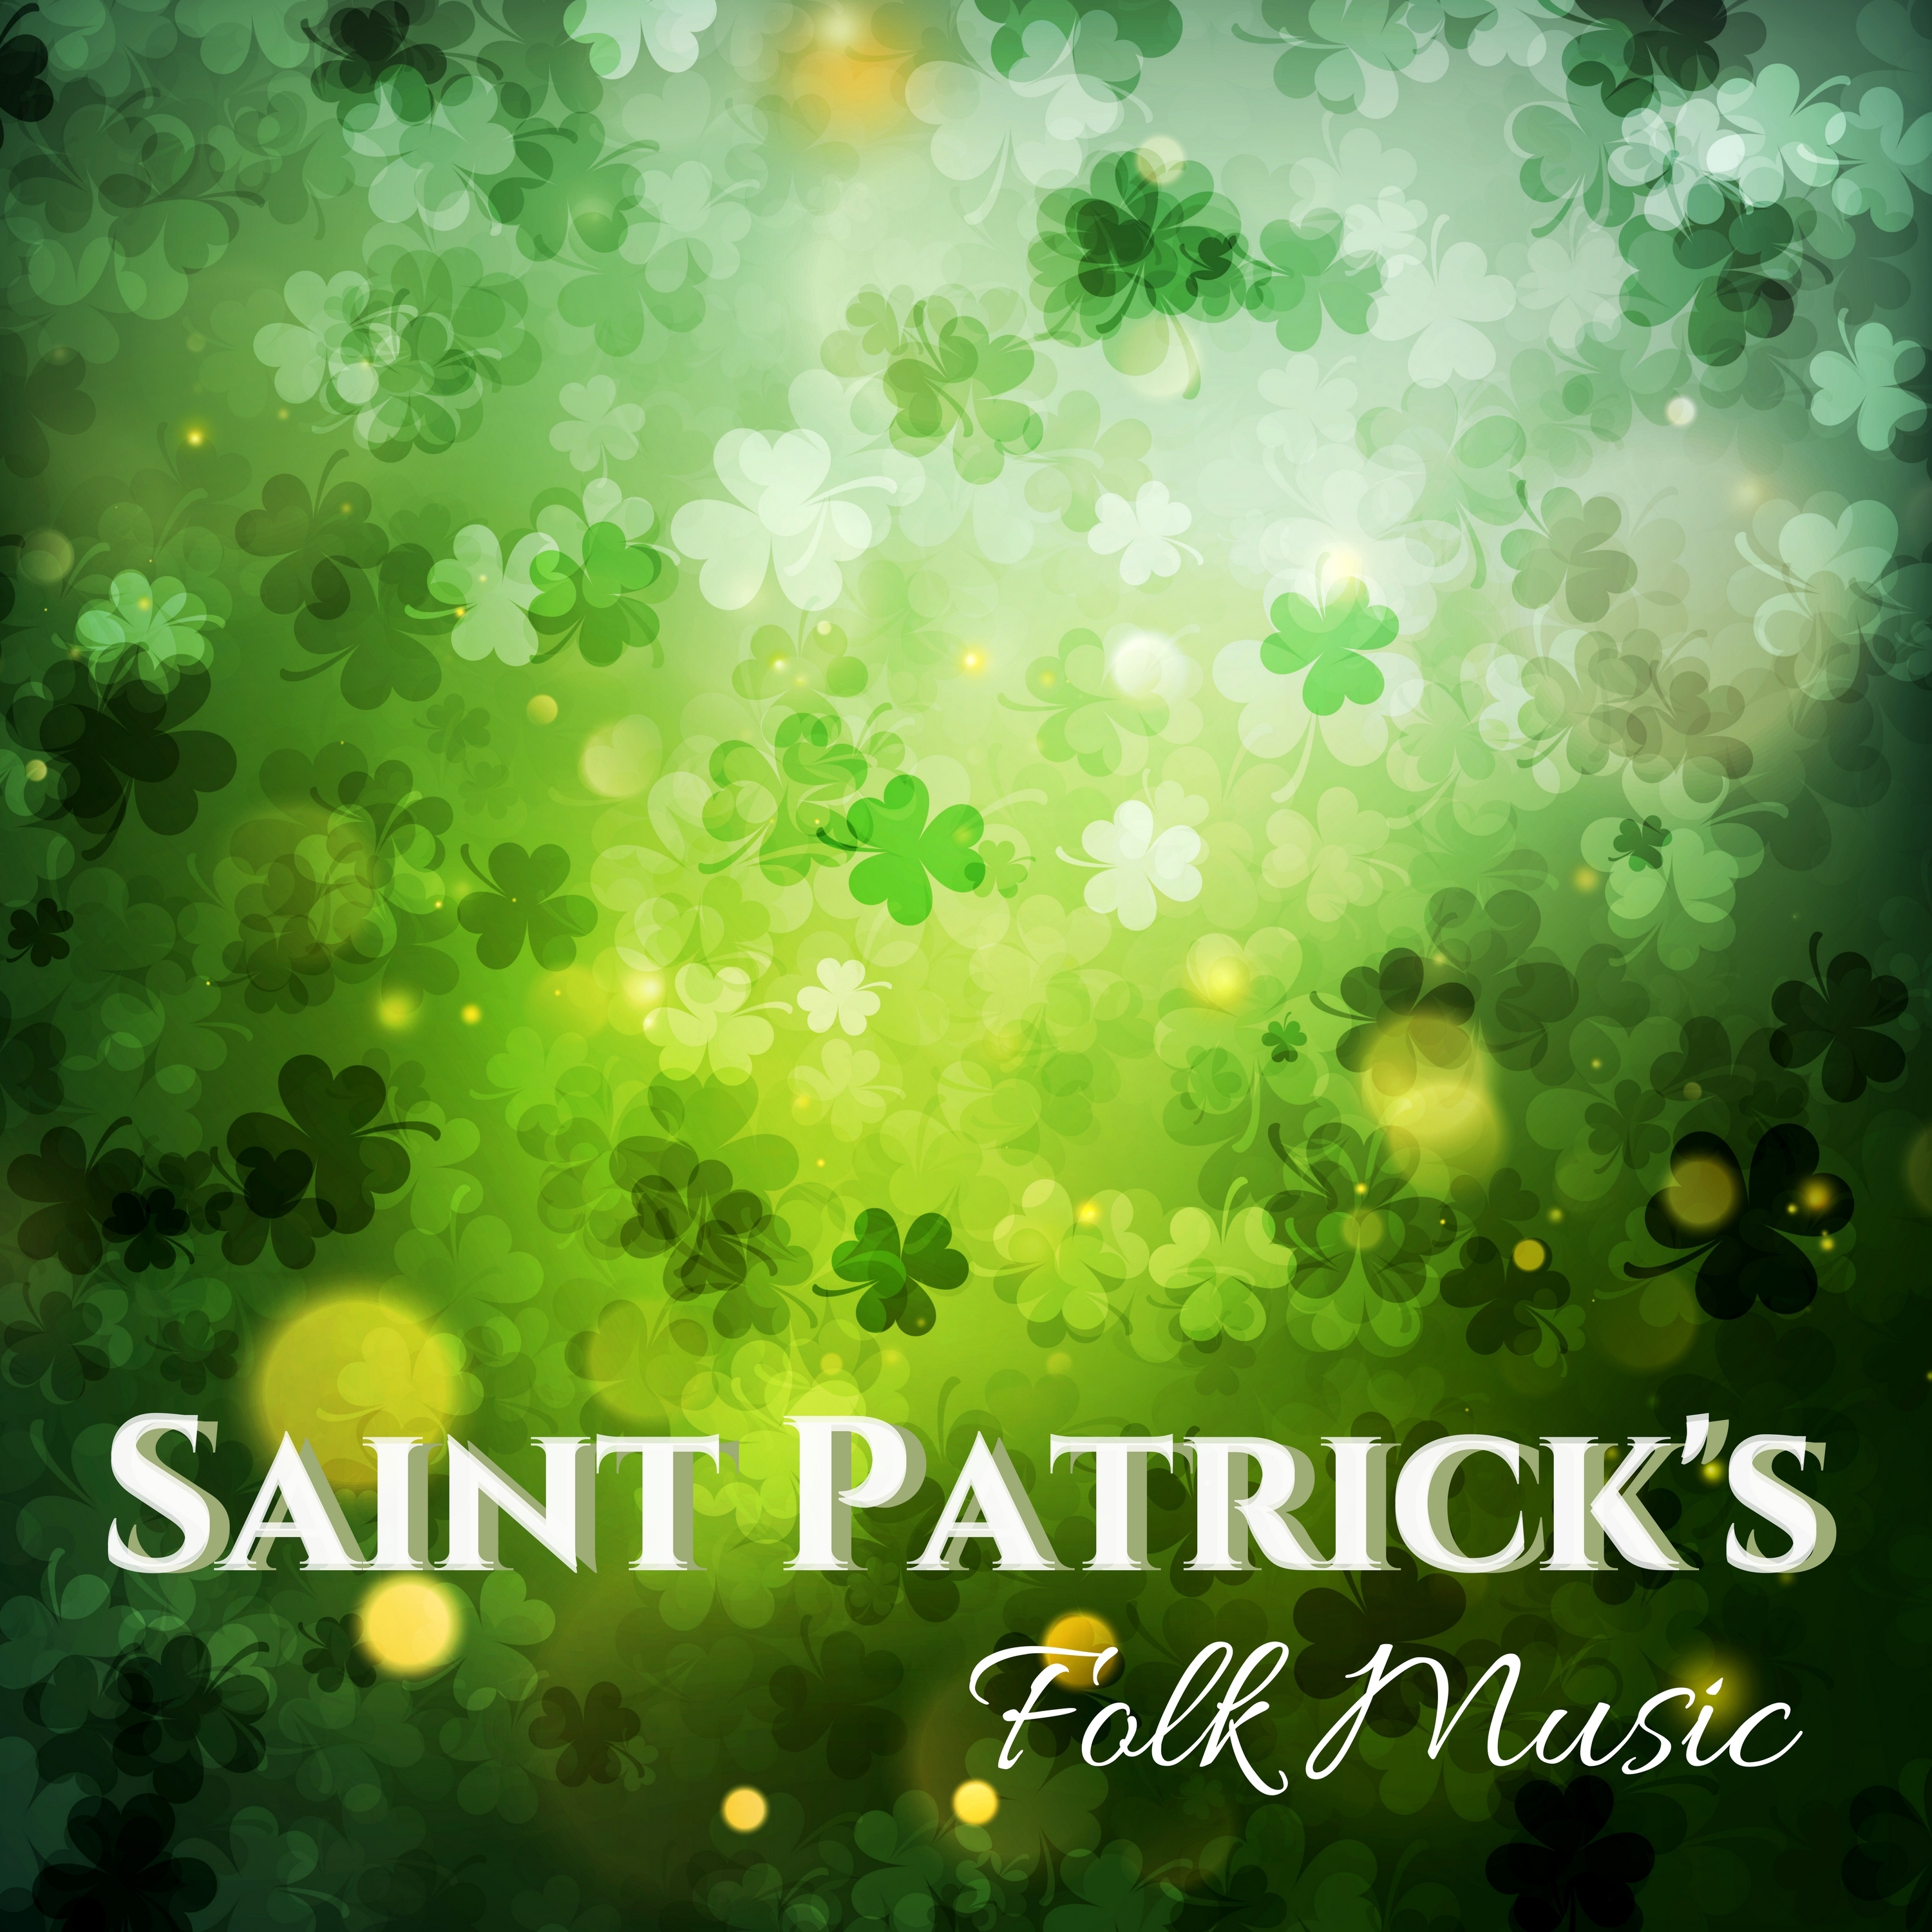 Saint Patrick's Folk Music - Traditional Celtic Harp Melodies from Ireland for St Paddy Irish Day